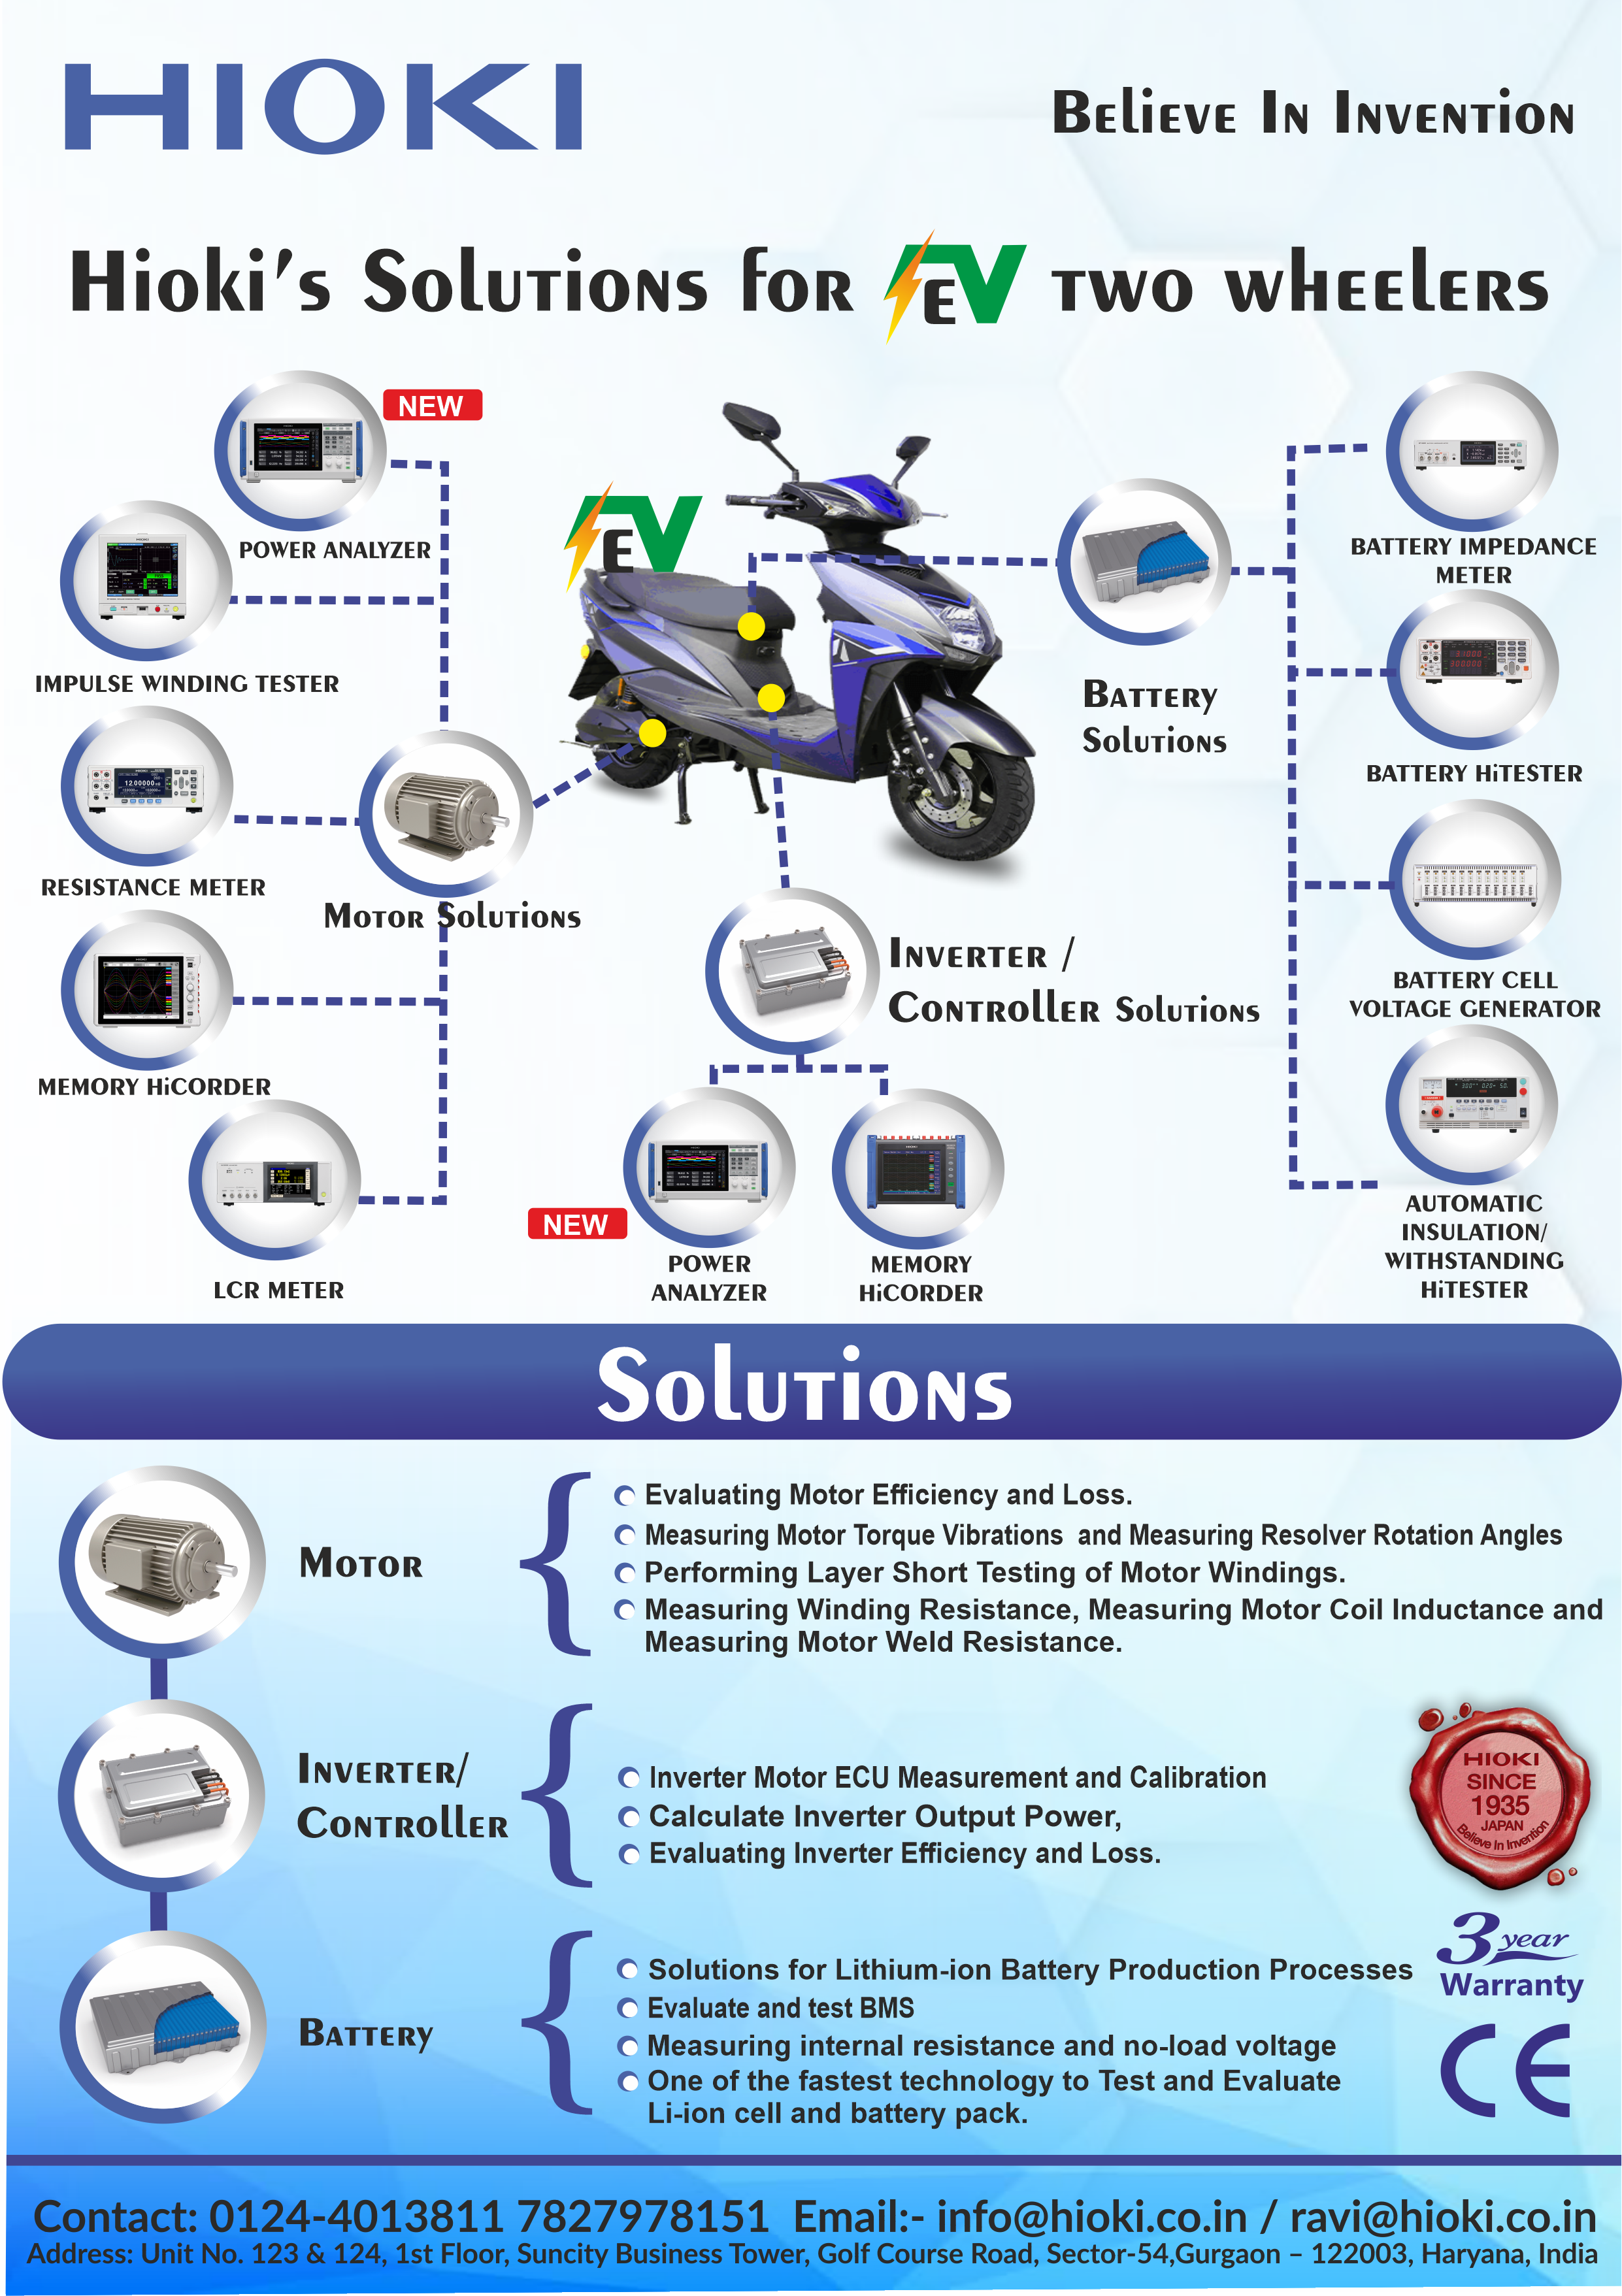 HIOKI India has Published The Solutions for EV two-wheelers in EFY Magazine - June 2022